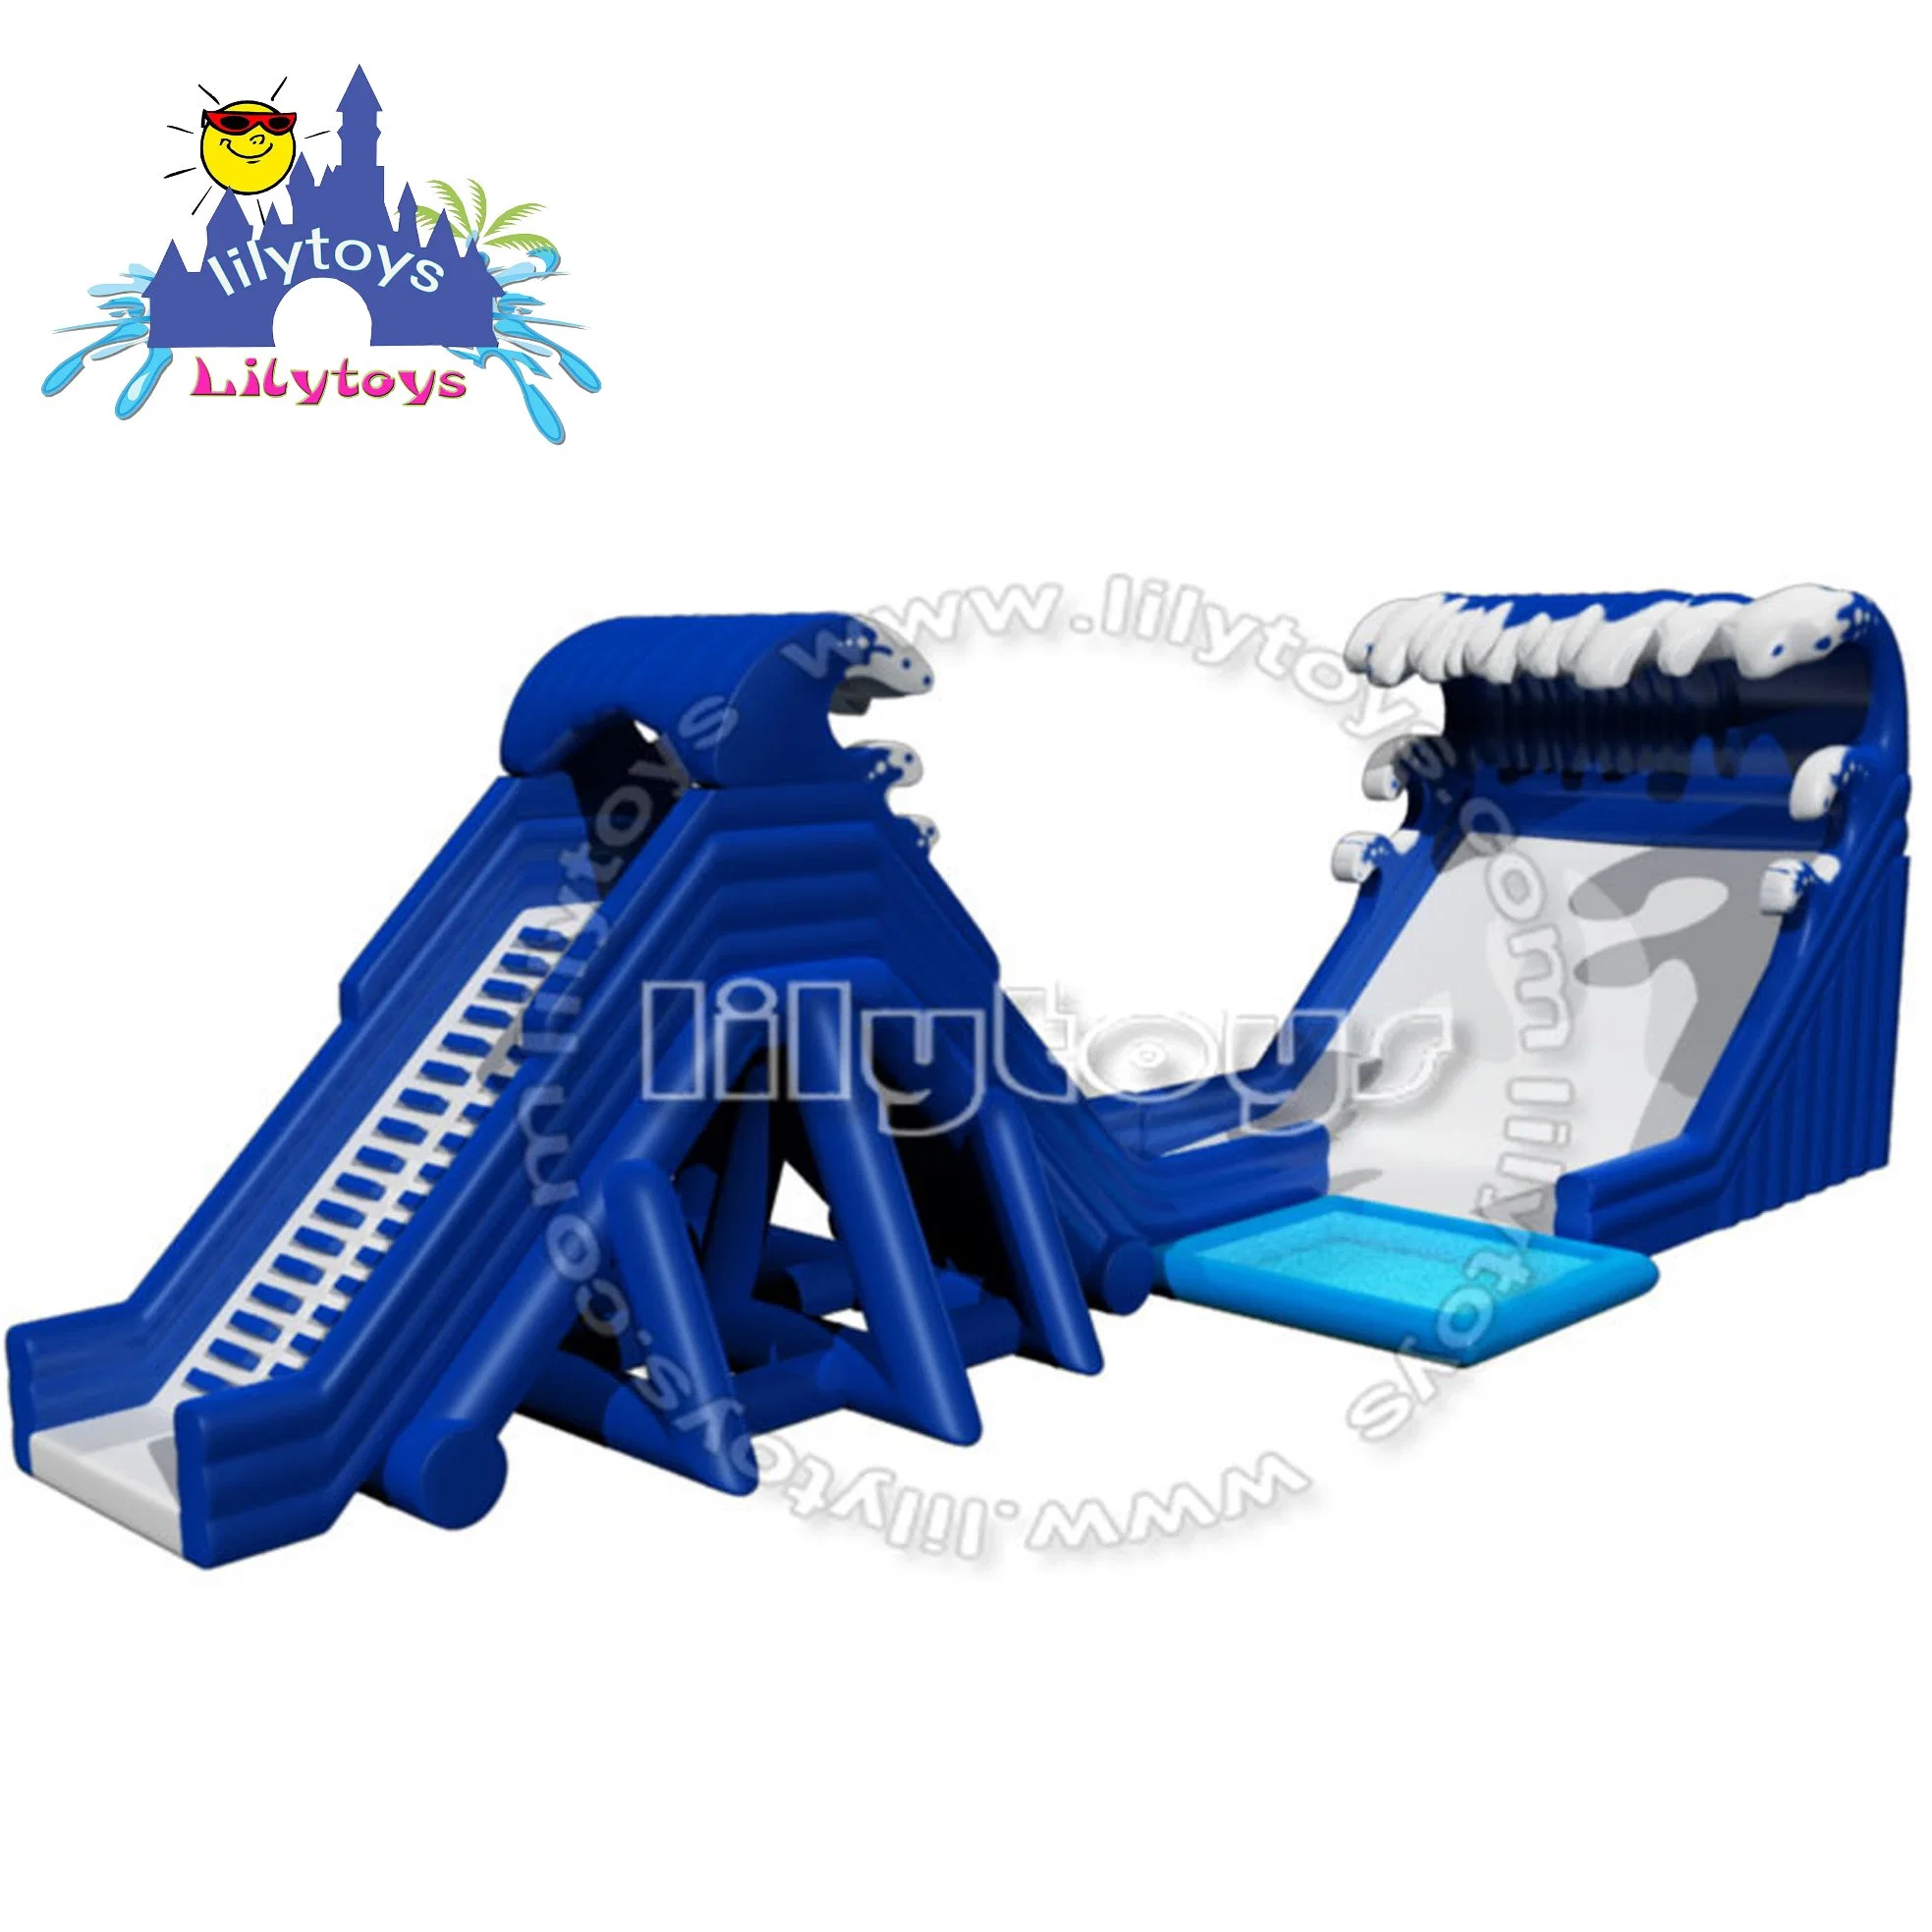 Giant Inflatable Water Slide Inflatable Adult Water Slide for Surfing